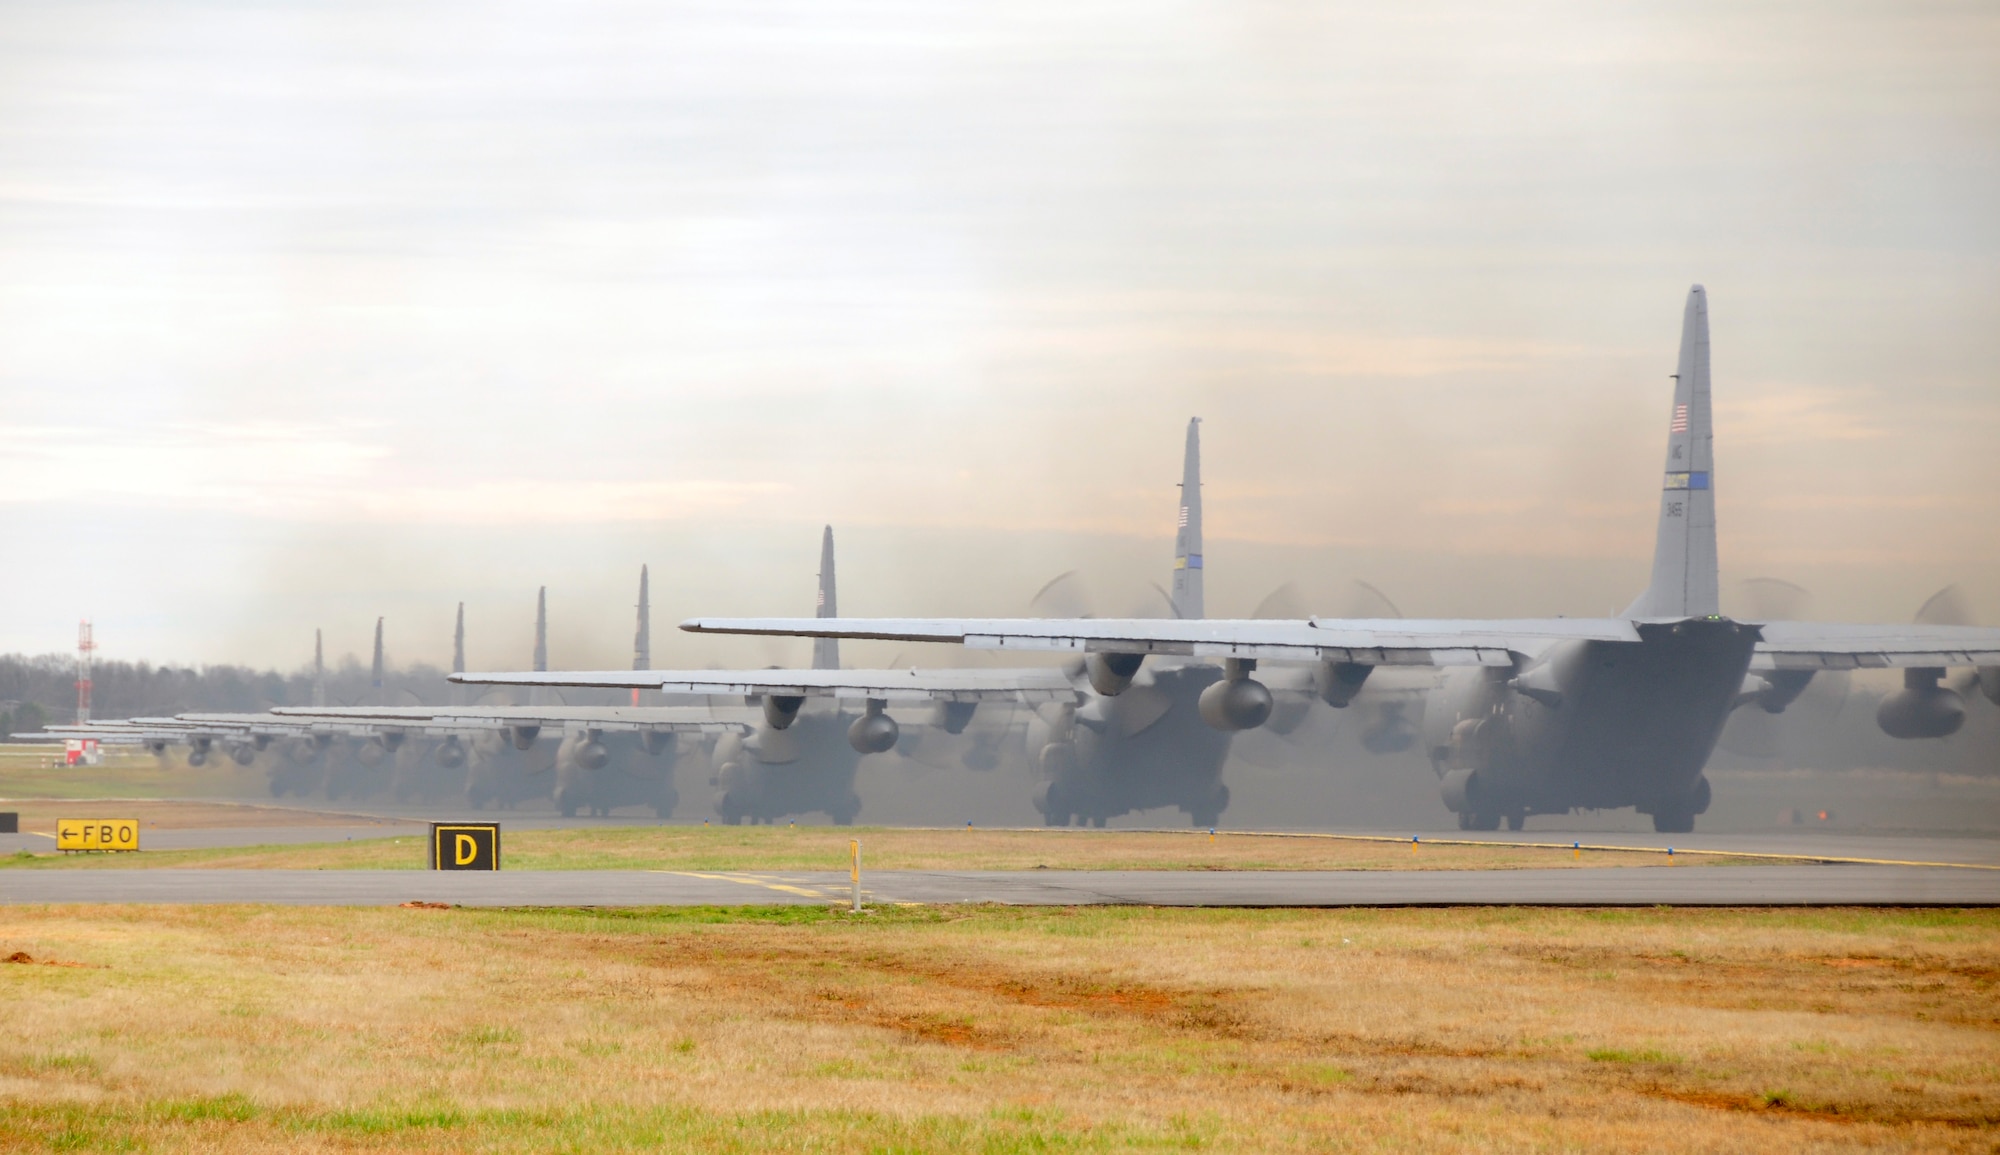 Nine C-130 Hercules aircraft assigned to the 145th Airlift Wing taxi out to runway in preparation for departure from the North Carolina Air National Guard Base, Charlotte Douglas International Airport, Feb. 7, 2016. Aircrew executed a tactical MAX flight launching all nine aircraft simultaneously. (U.S. Air National Guard photo by Master Sgt. Rich Kerner/Released)